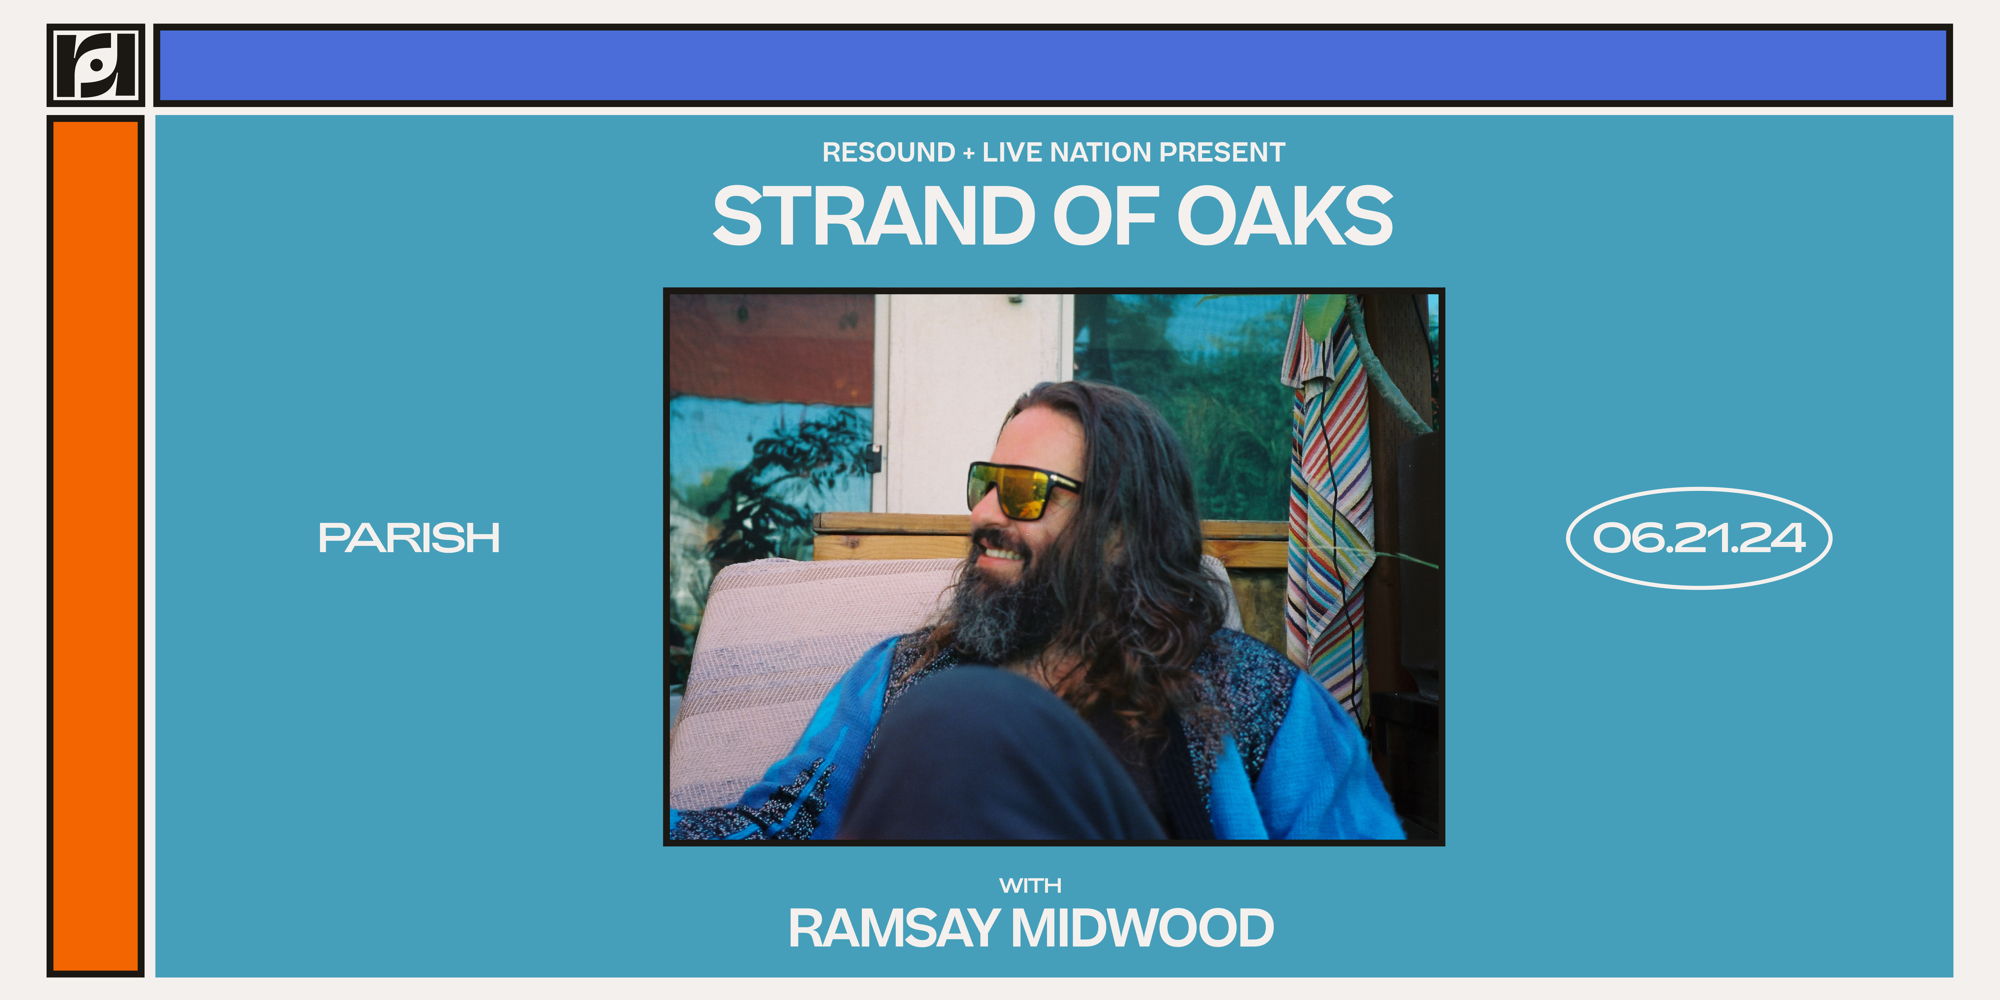  Resound & Live Nation Present: Strand of Oaks w/ Ramsay Midwood at Parish on 6/21 promotional image